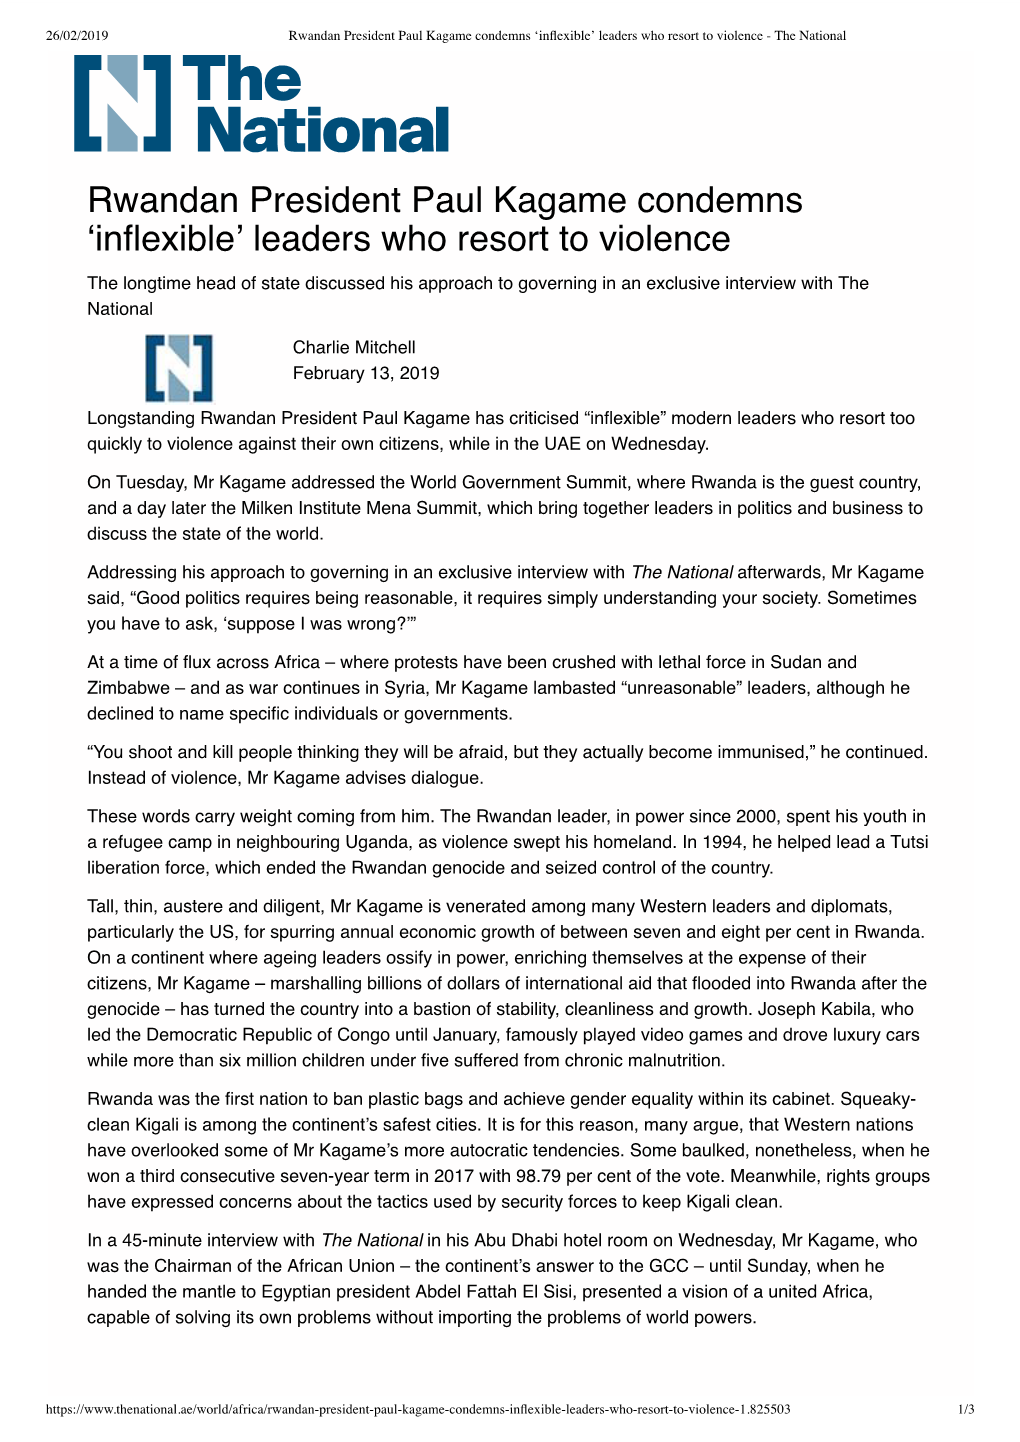 Rwandan President Paul Kagame Condemns 'Inflexible' Leaders Who Resort to Violence